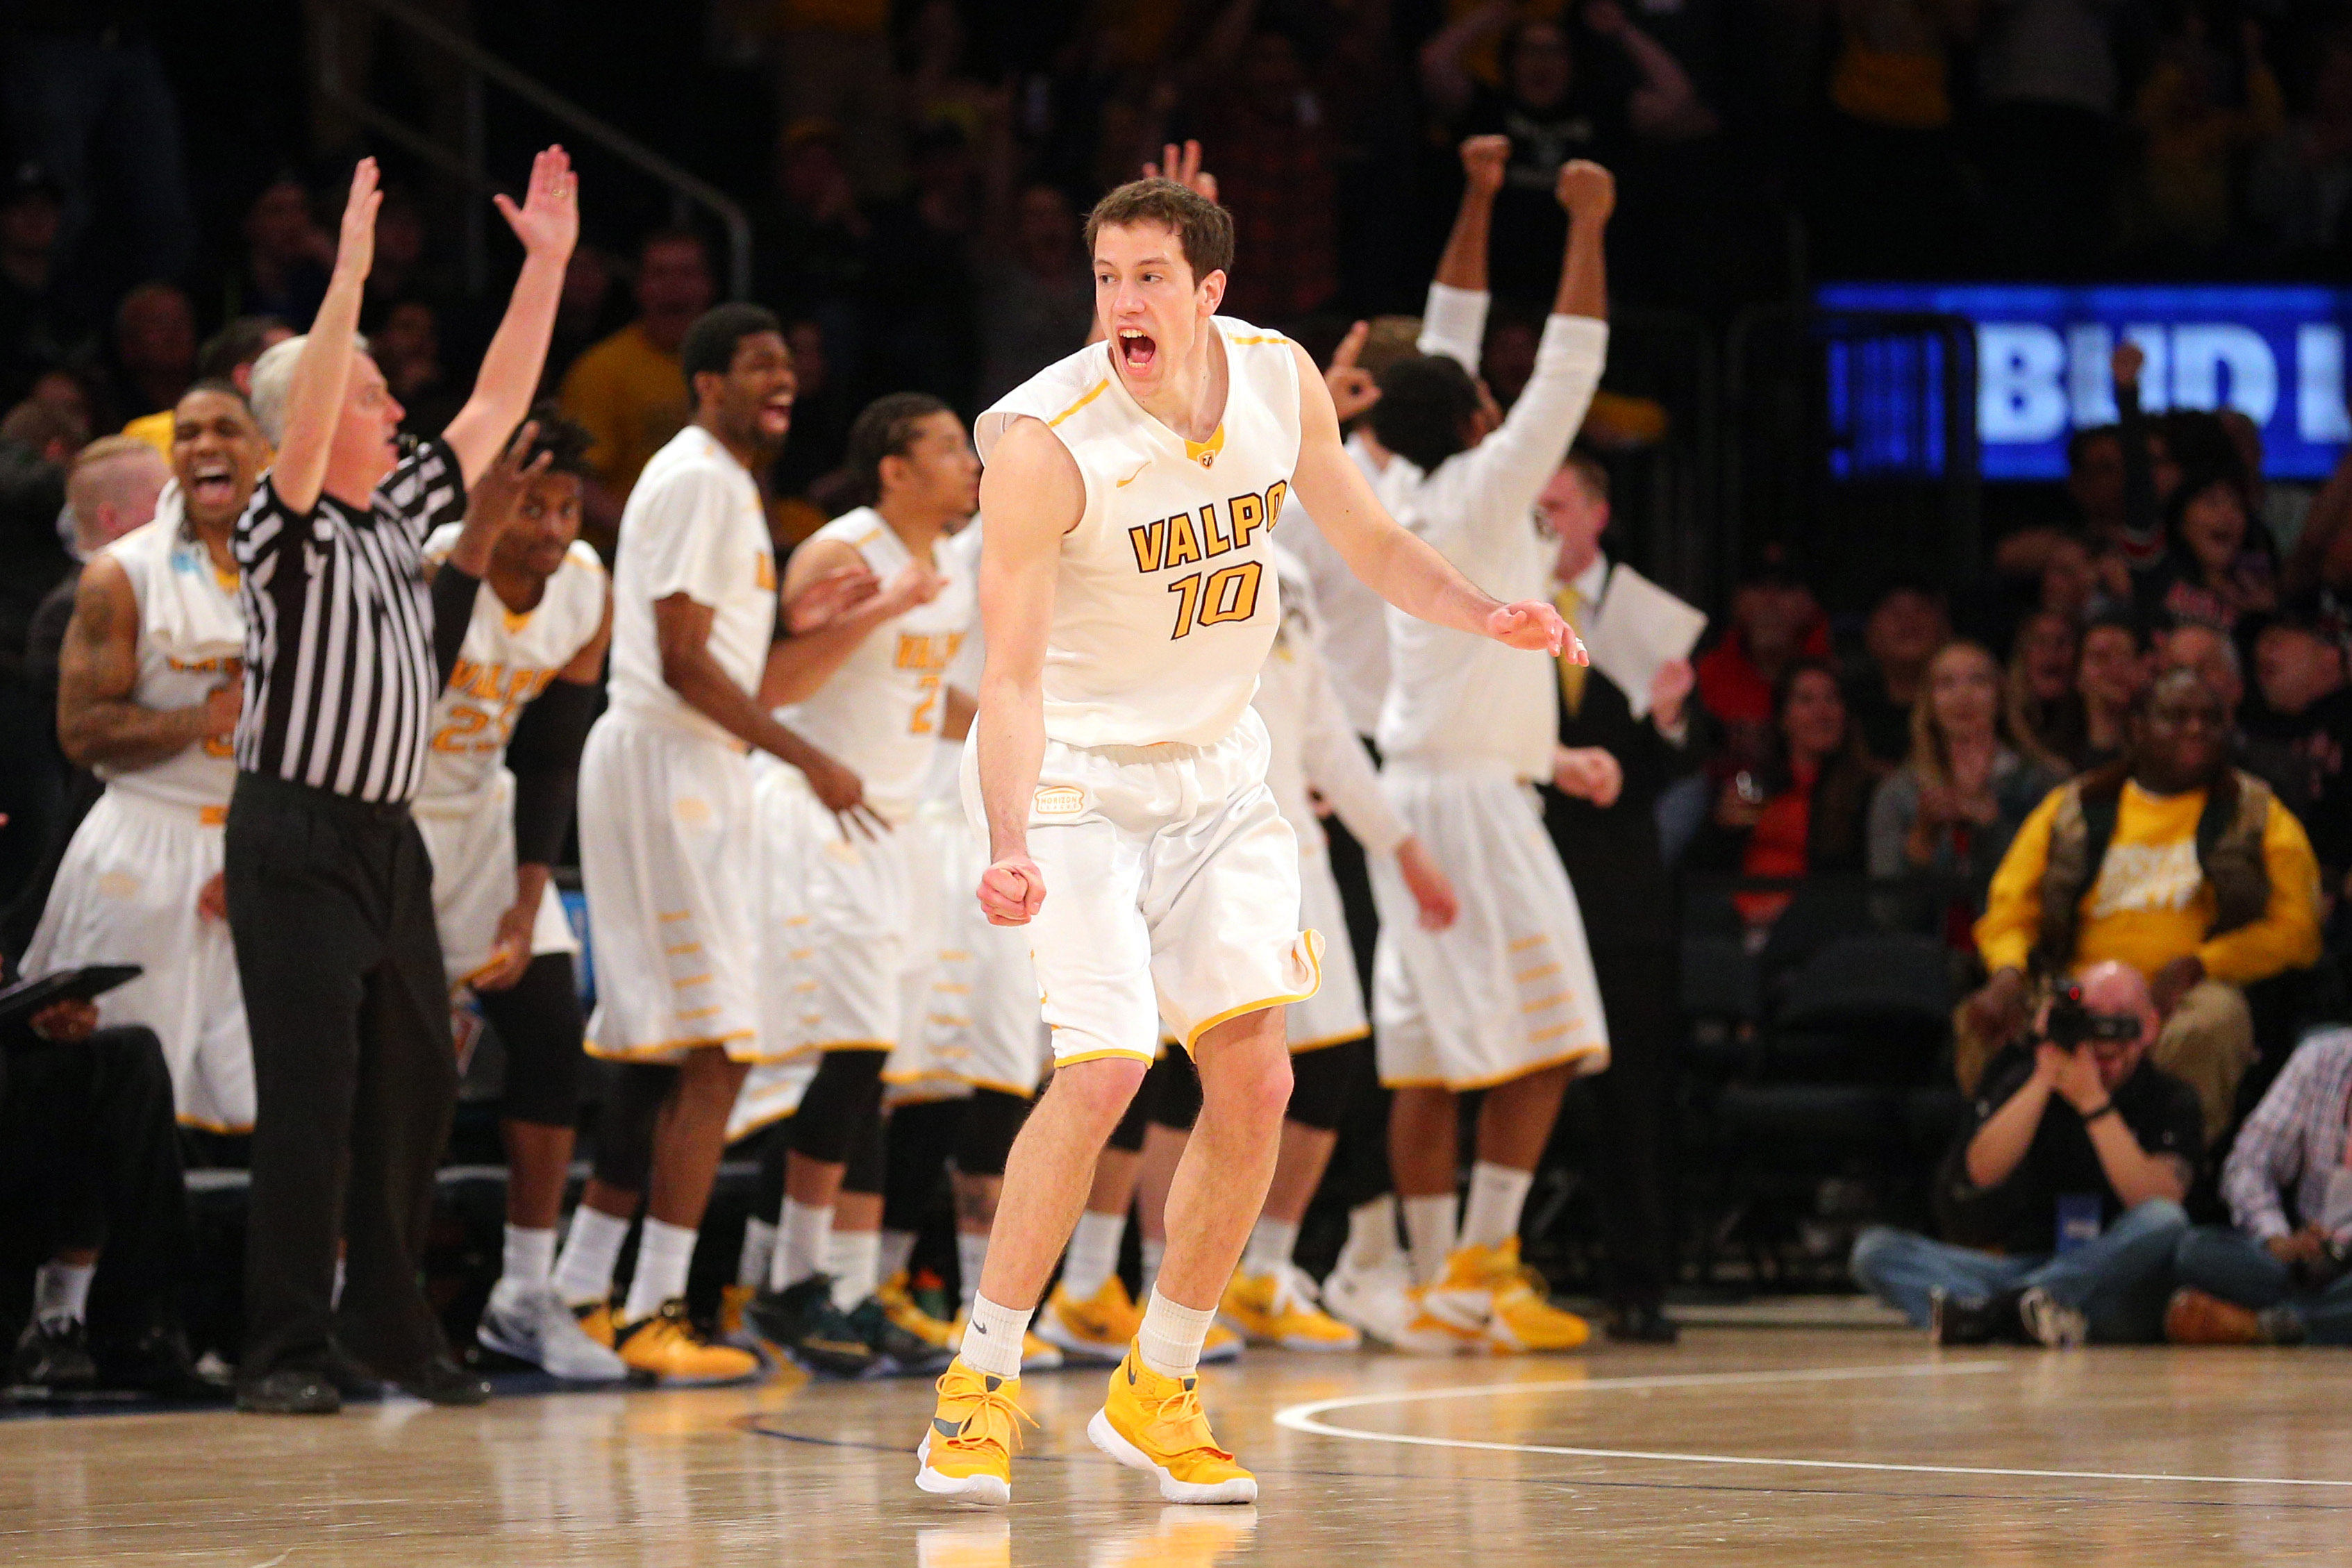 David Skara reacts after knocking down what would be the game winning three pointer.